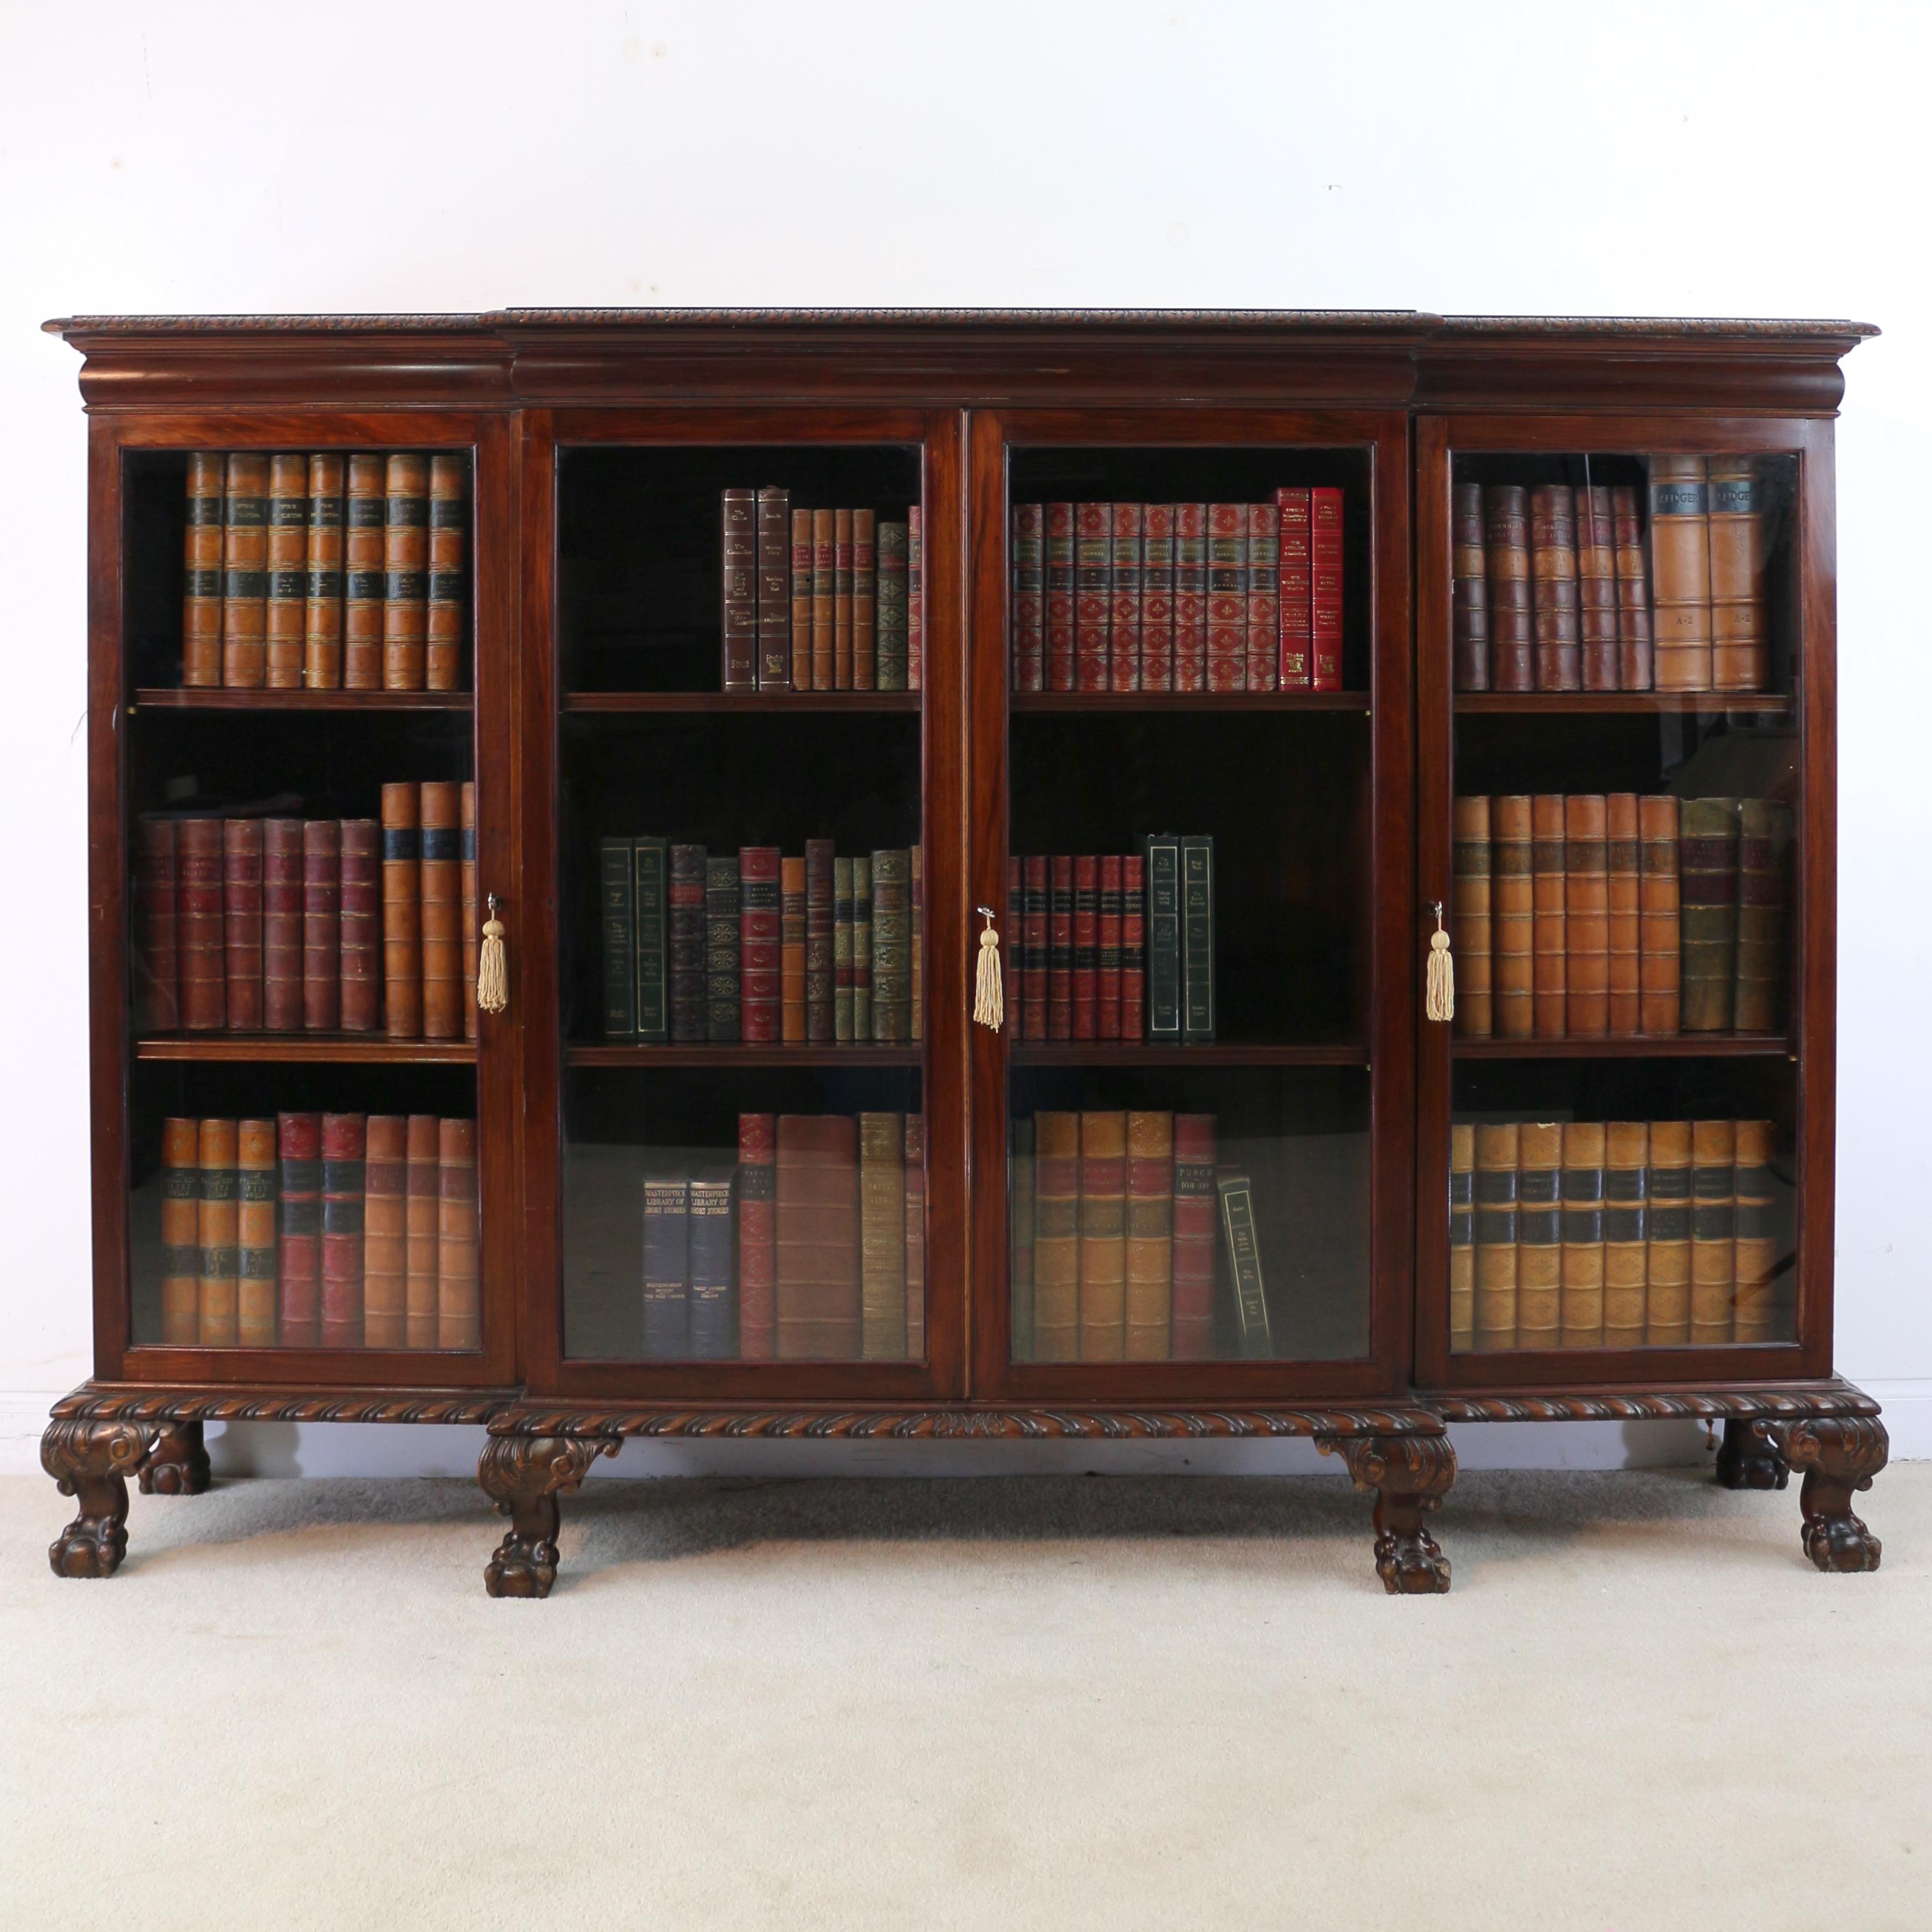 An attractive late 19th century solid mahogany four door breakfront dwarf bookcase / cabinet in the Chippendale style. The rectangular breakfront top with a leaf carved edge above a swelled frieze, the four glazed doors below with working locks and